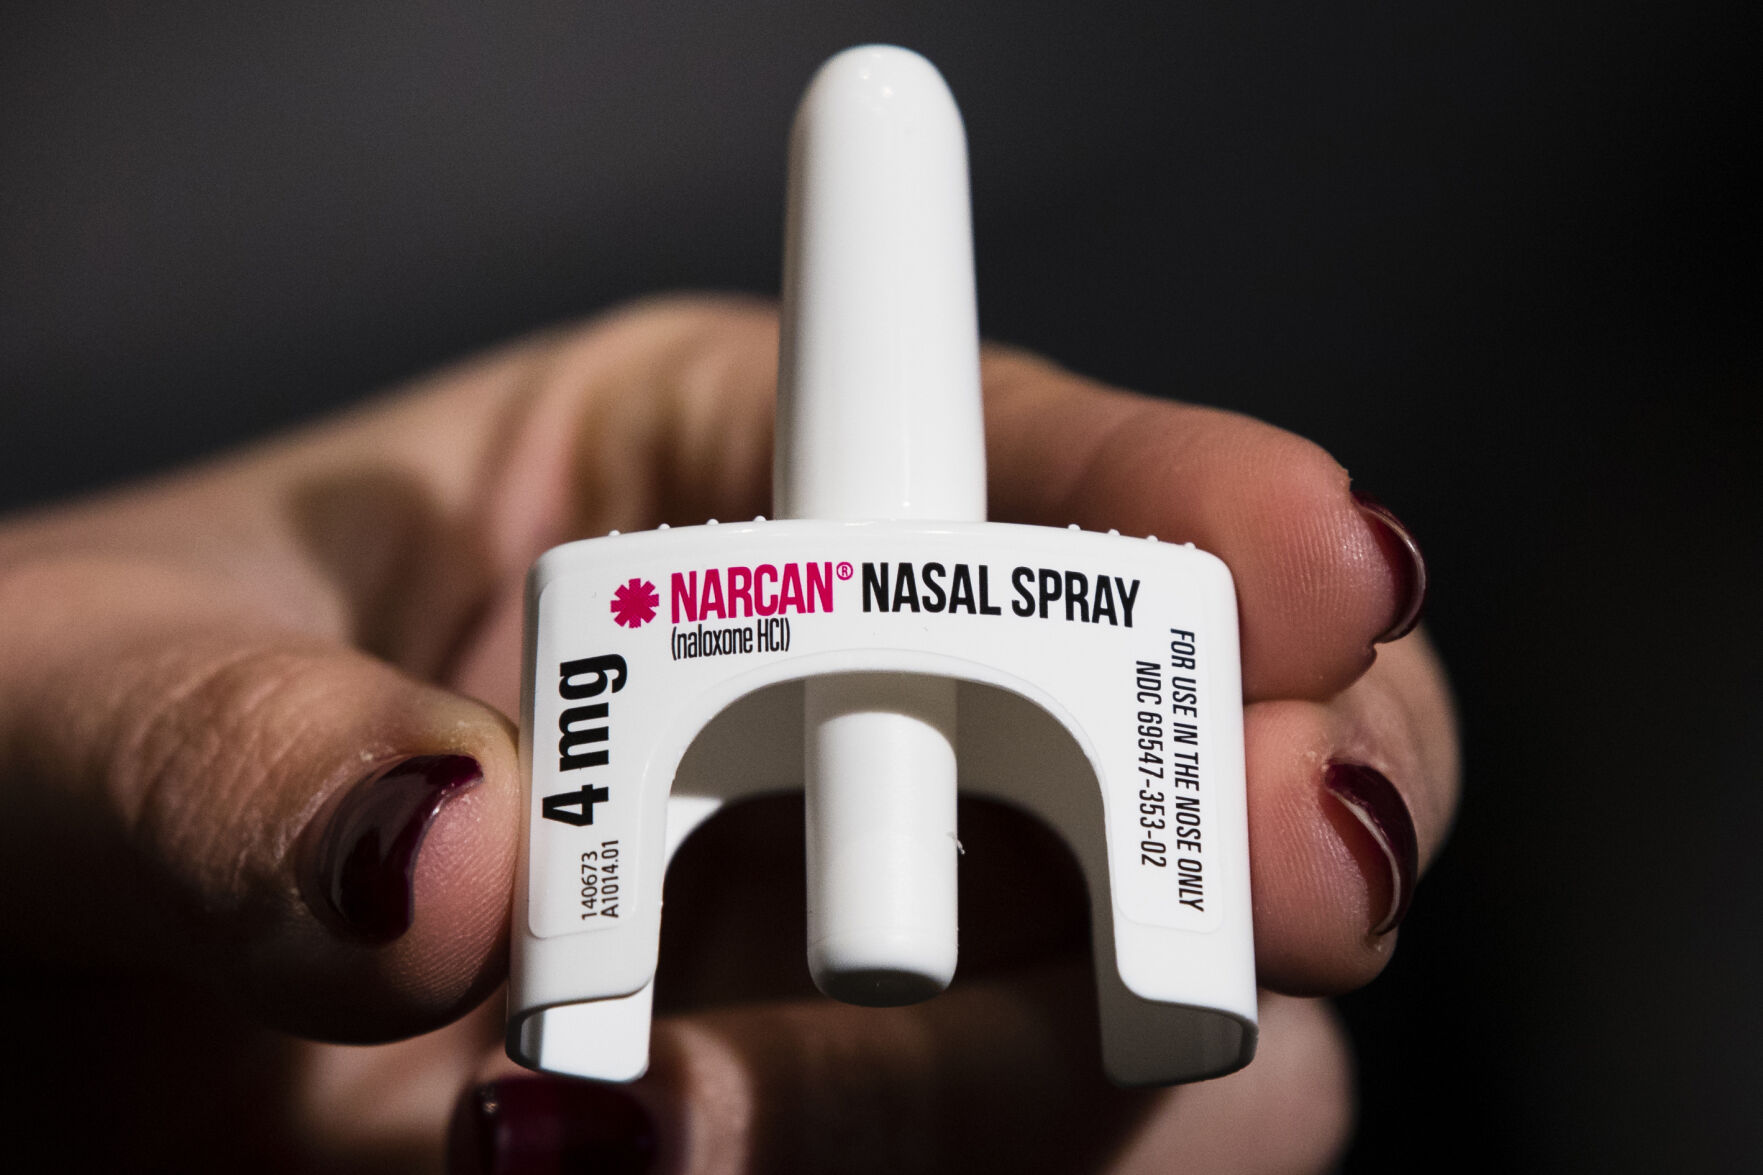 <p>FILE - The overdose-reversal drug Narcan is displayed during training for employees of the Public Health Management Corporation (PHMC), Dec. 4, 2018, in Philadelphia. The U.S. Food and Drug Administration has approved selling overdose antidote naloxone over-the-counter, Wednesday, March 29, 2023, marking the first time a opioid treatment drug will be available without a prescription. (AP Photo/Matt Rourke, File)</p>   PHOTO CREDIT: Matt Rourke 